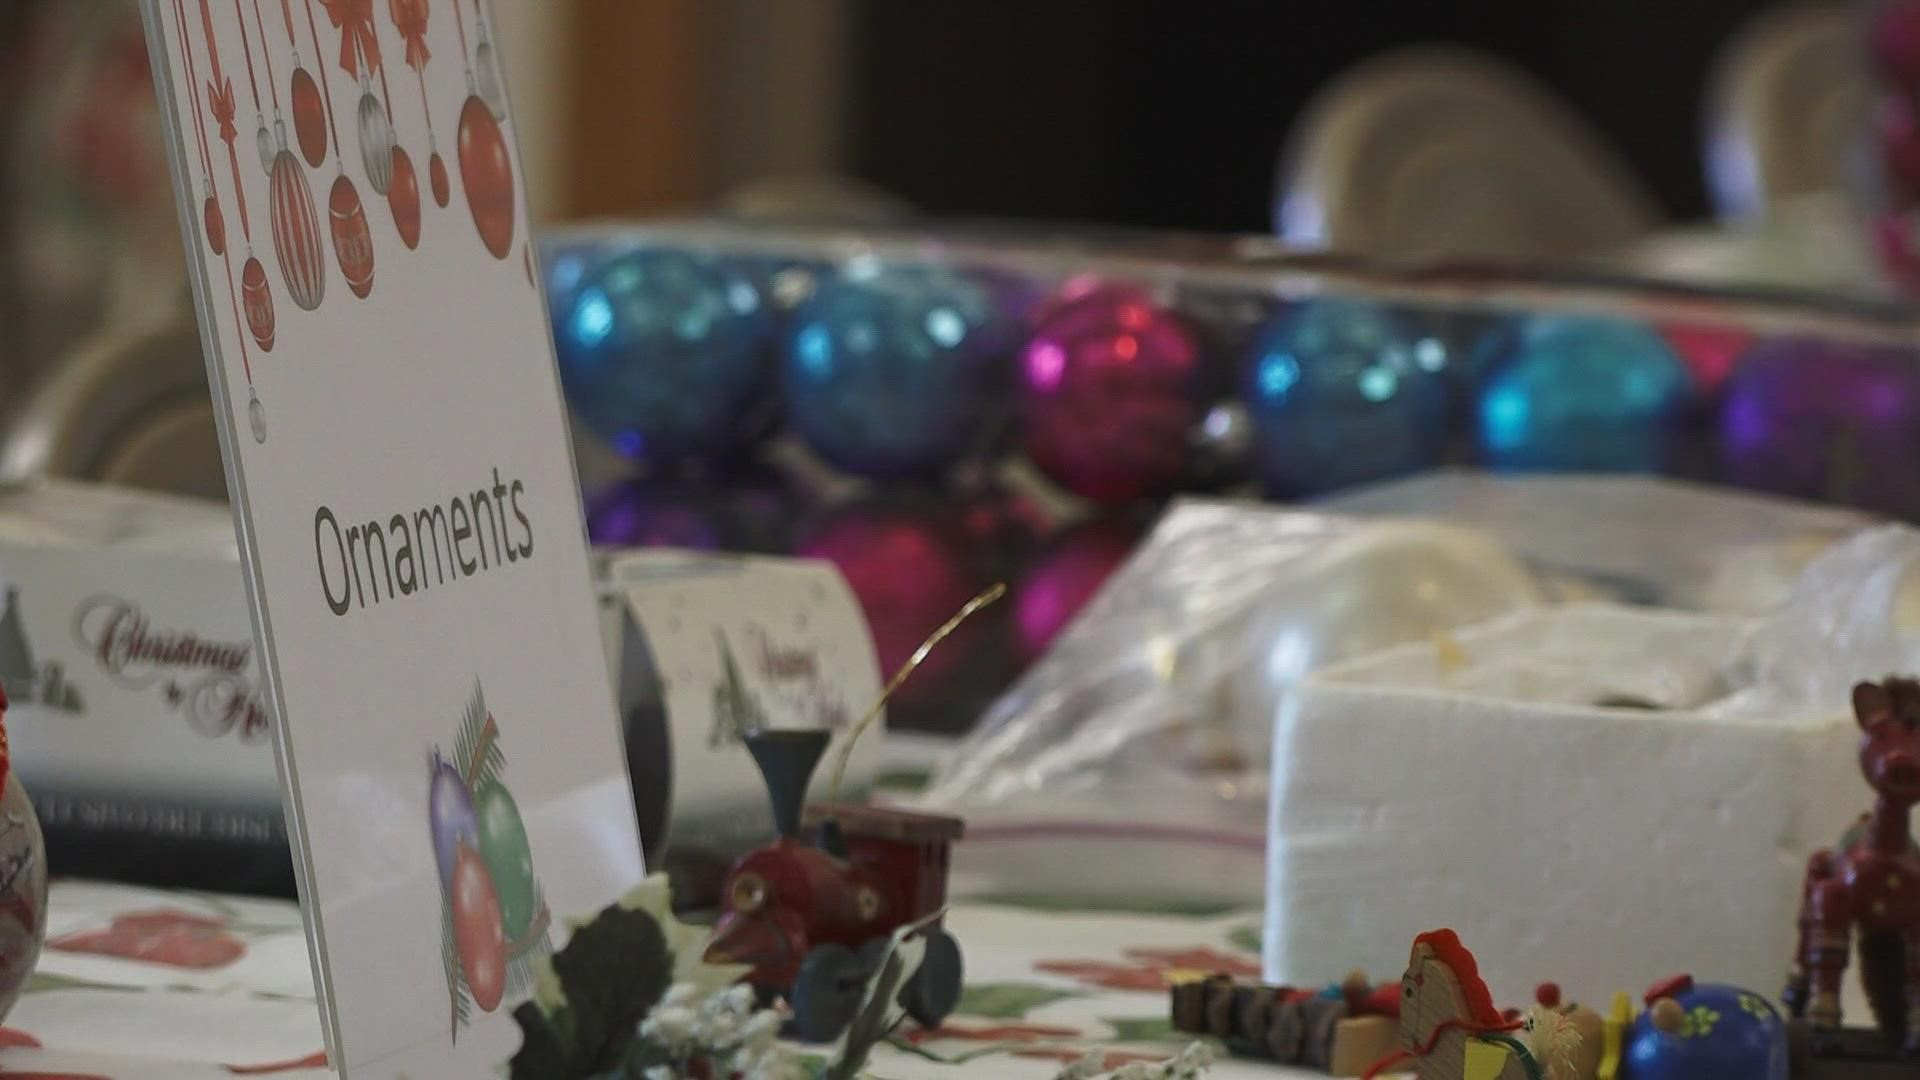 Zion Lutheran Church in Woodland is opening its doors at 10 A.M. for its holiday decoration giveaway.